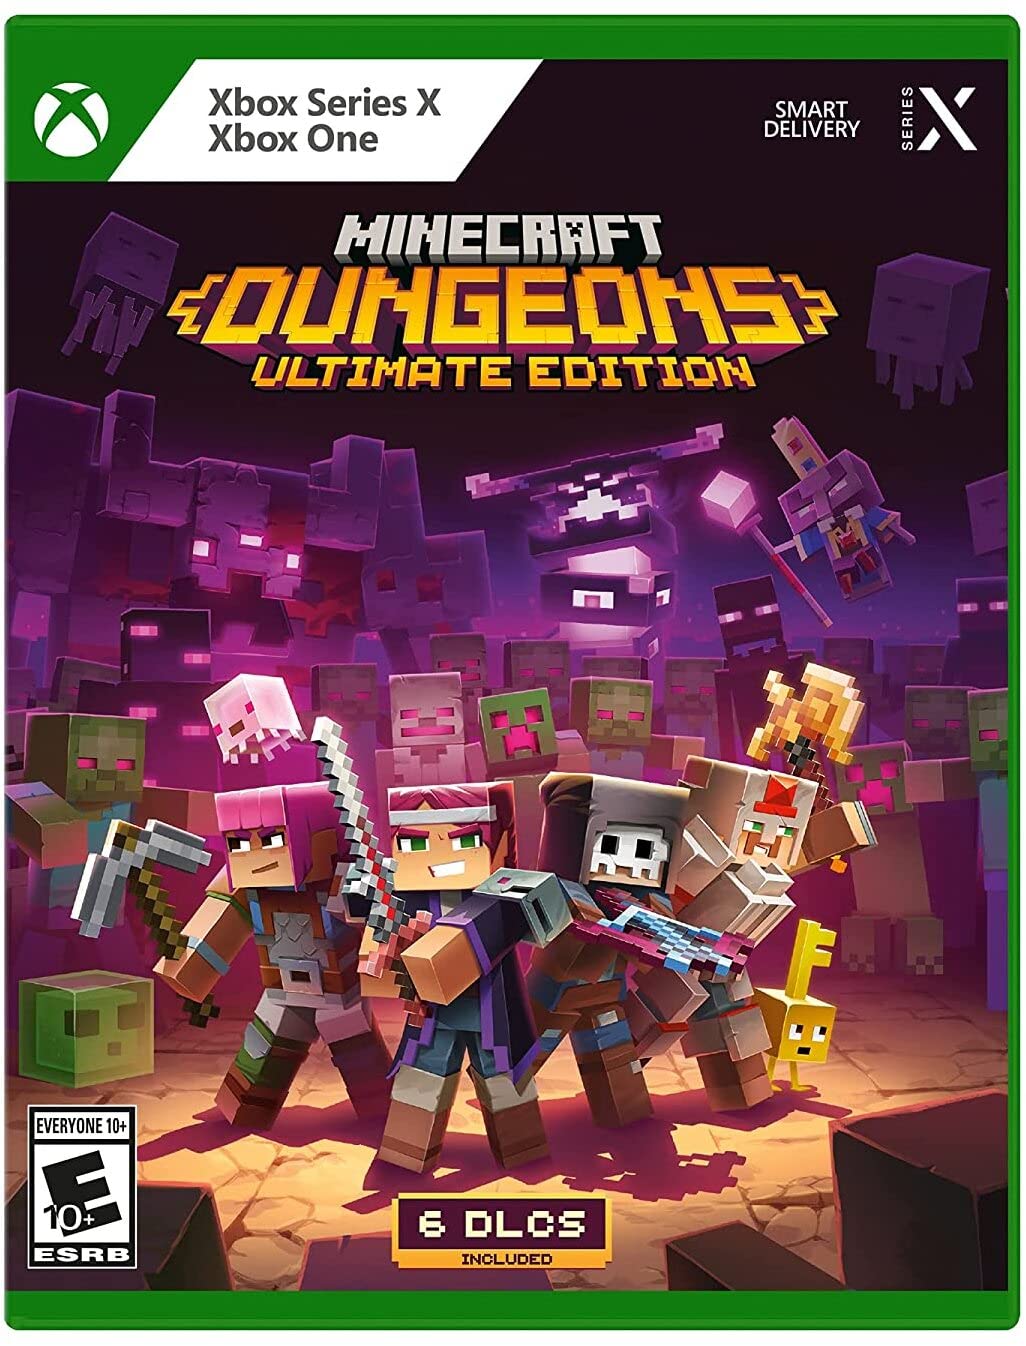 Xbox-One-Minecraft-Dungeons-tech-junction-store